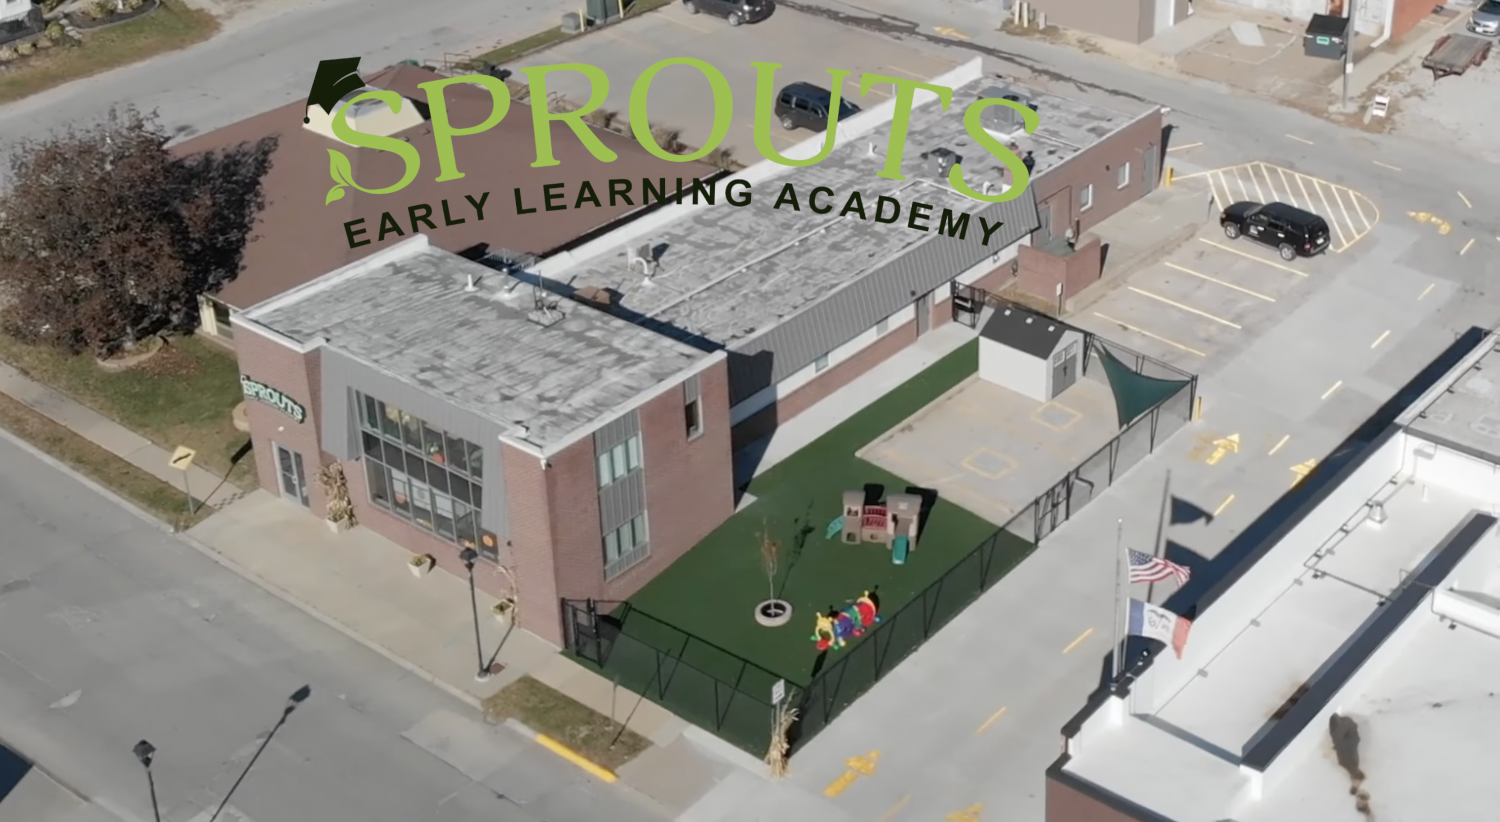 sprouts early learning academy aerial view with logo placed in the top center of the photo